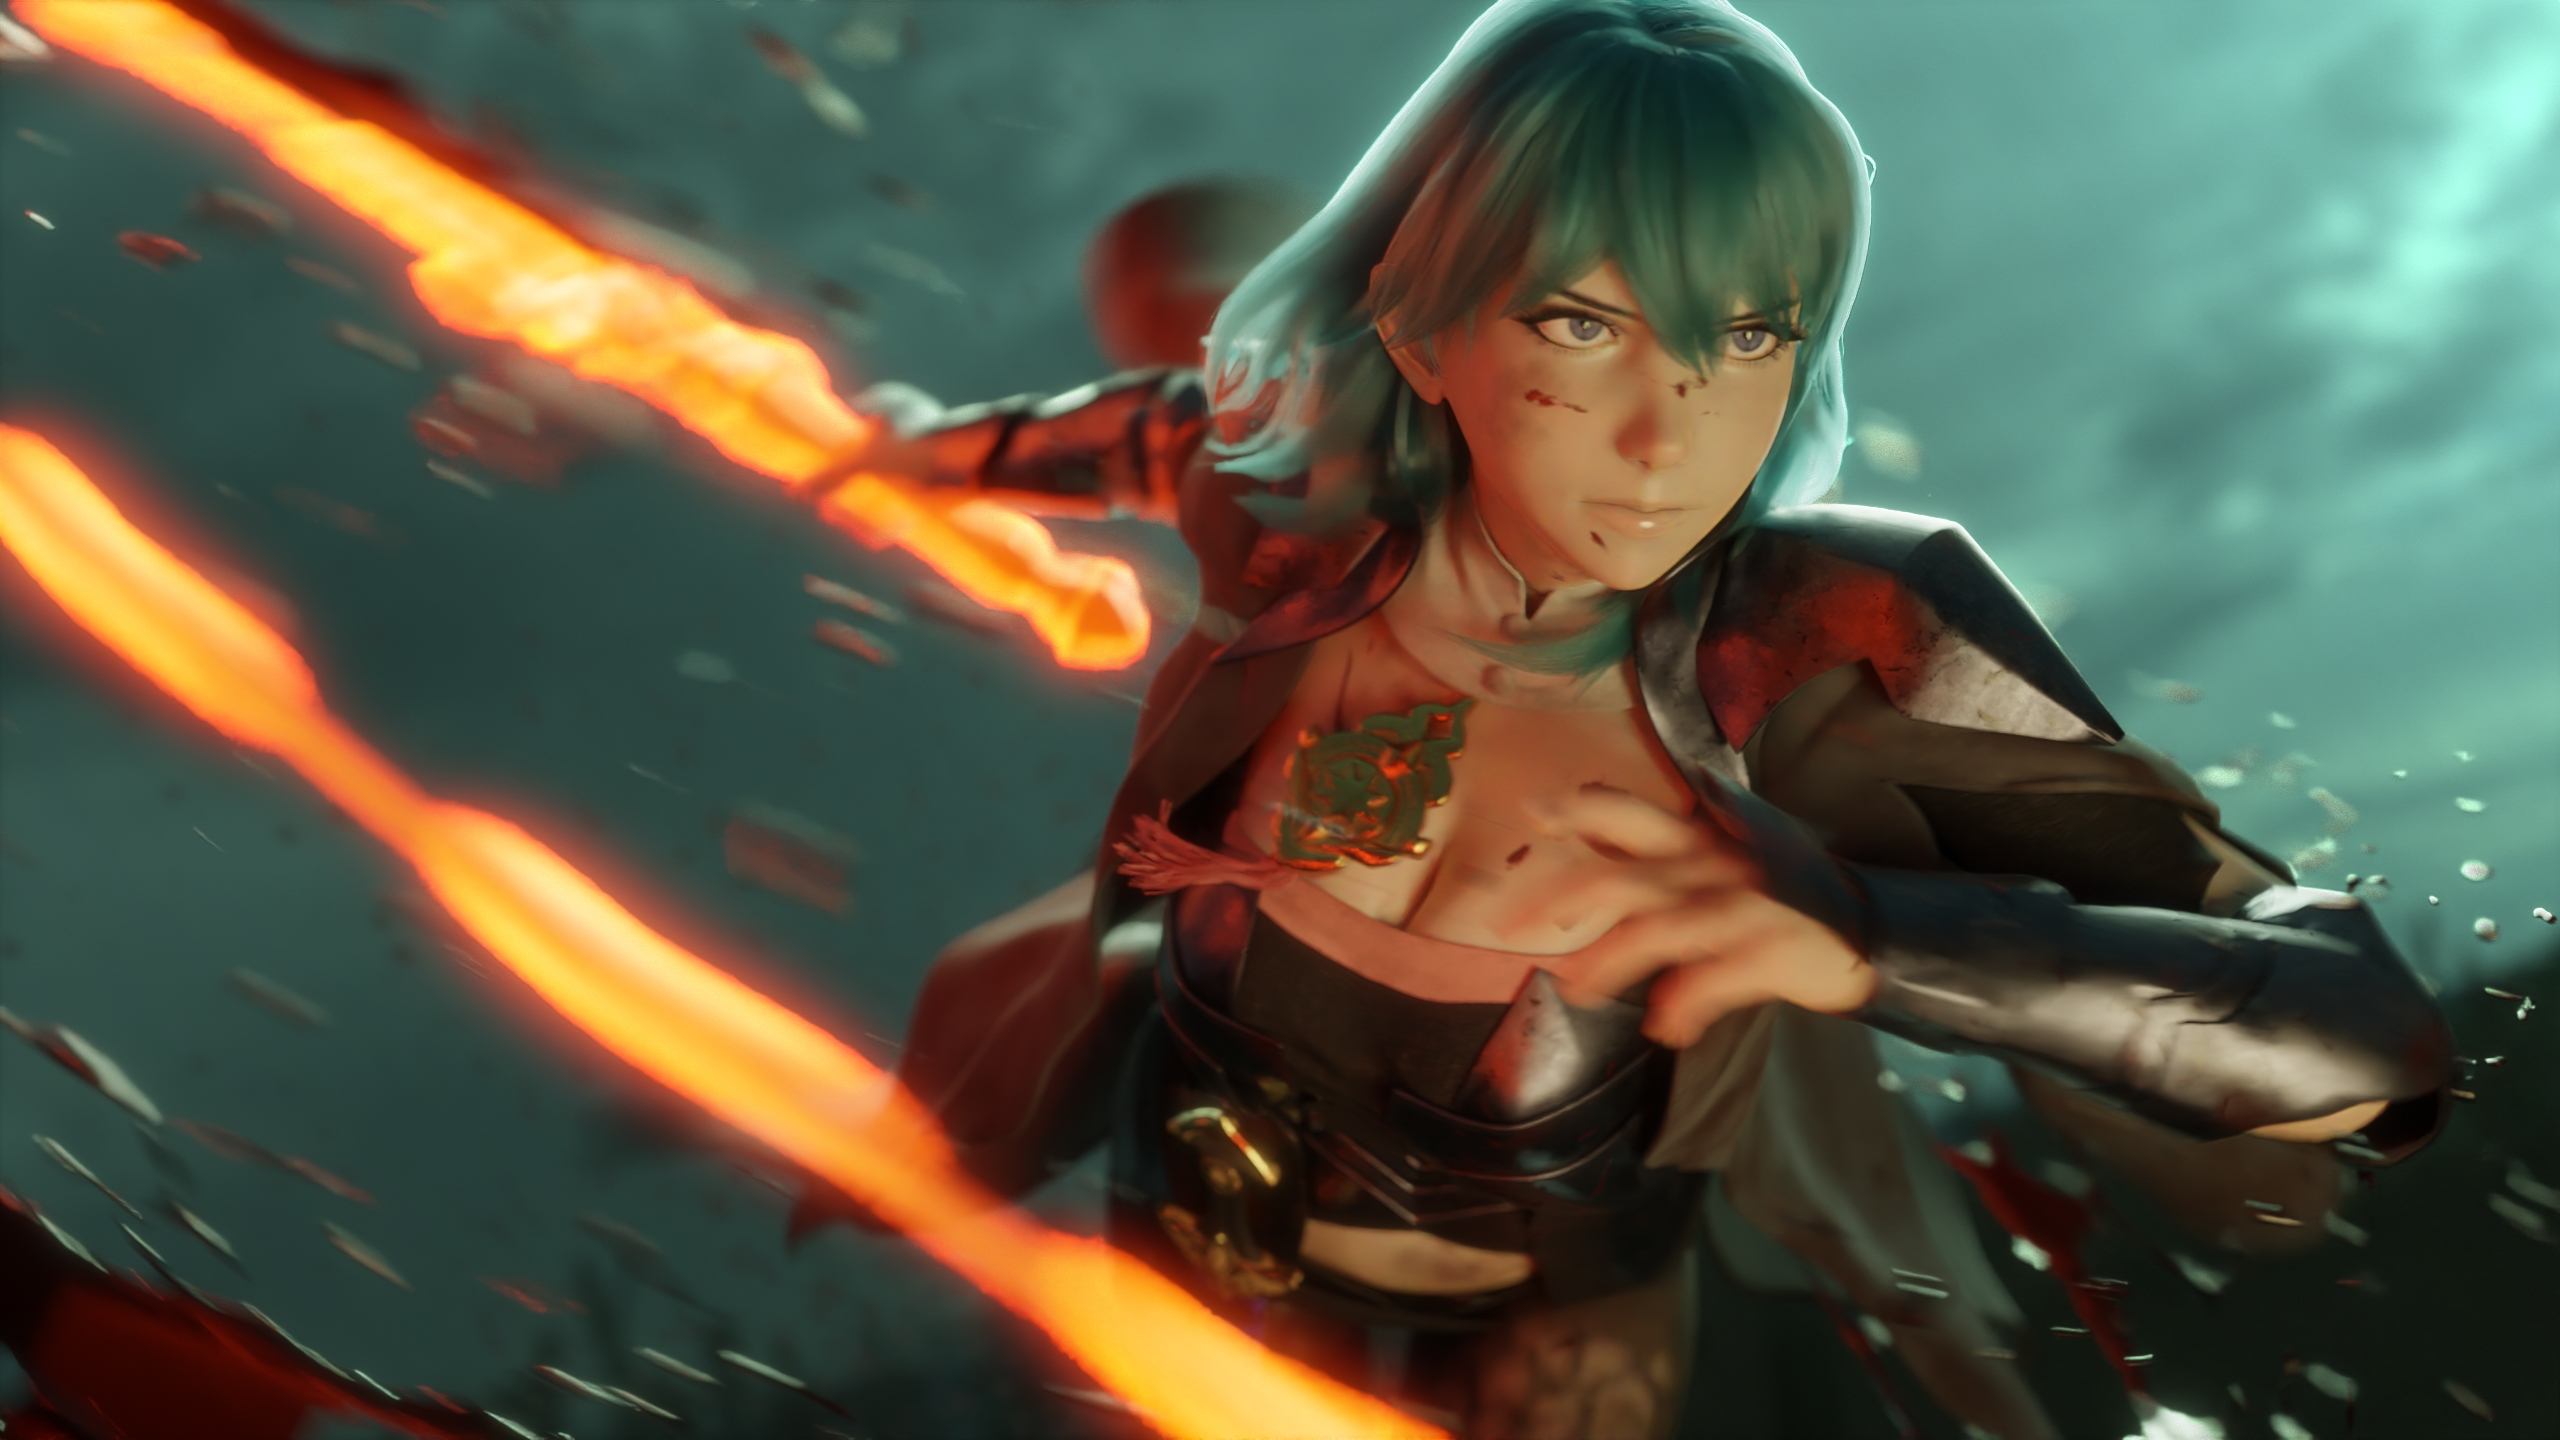 Byleth sexy pose Byleth Fire Emblem Sfw Boobs Cleavage Sexy Hot 3d Porn